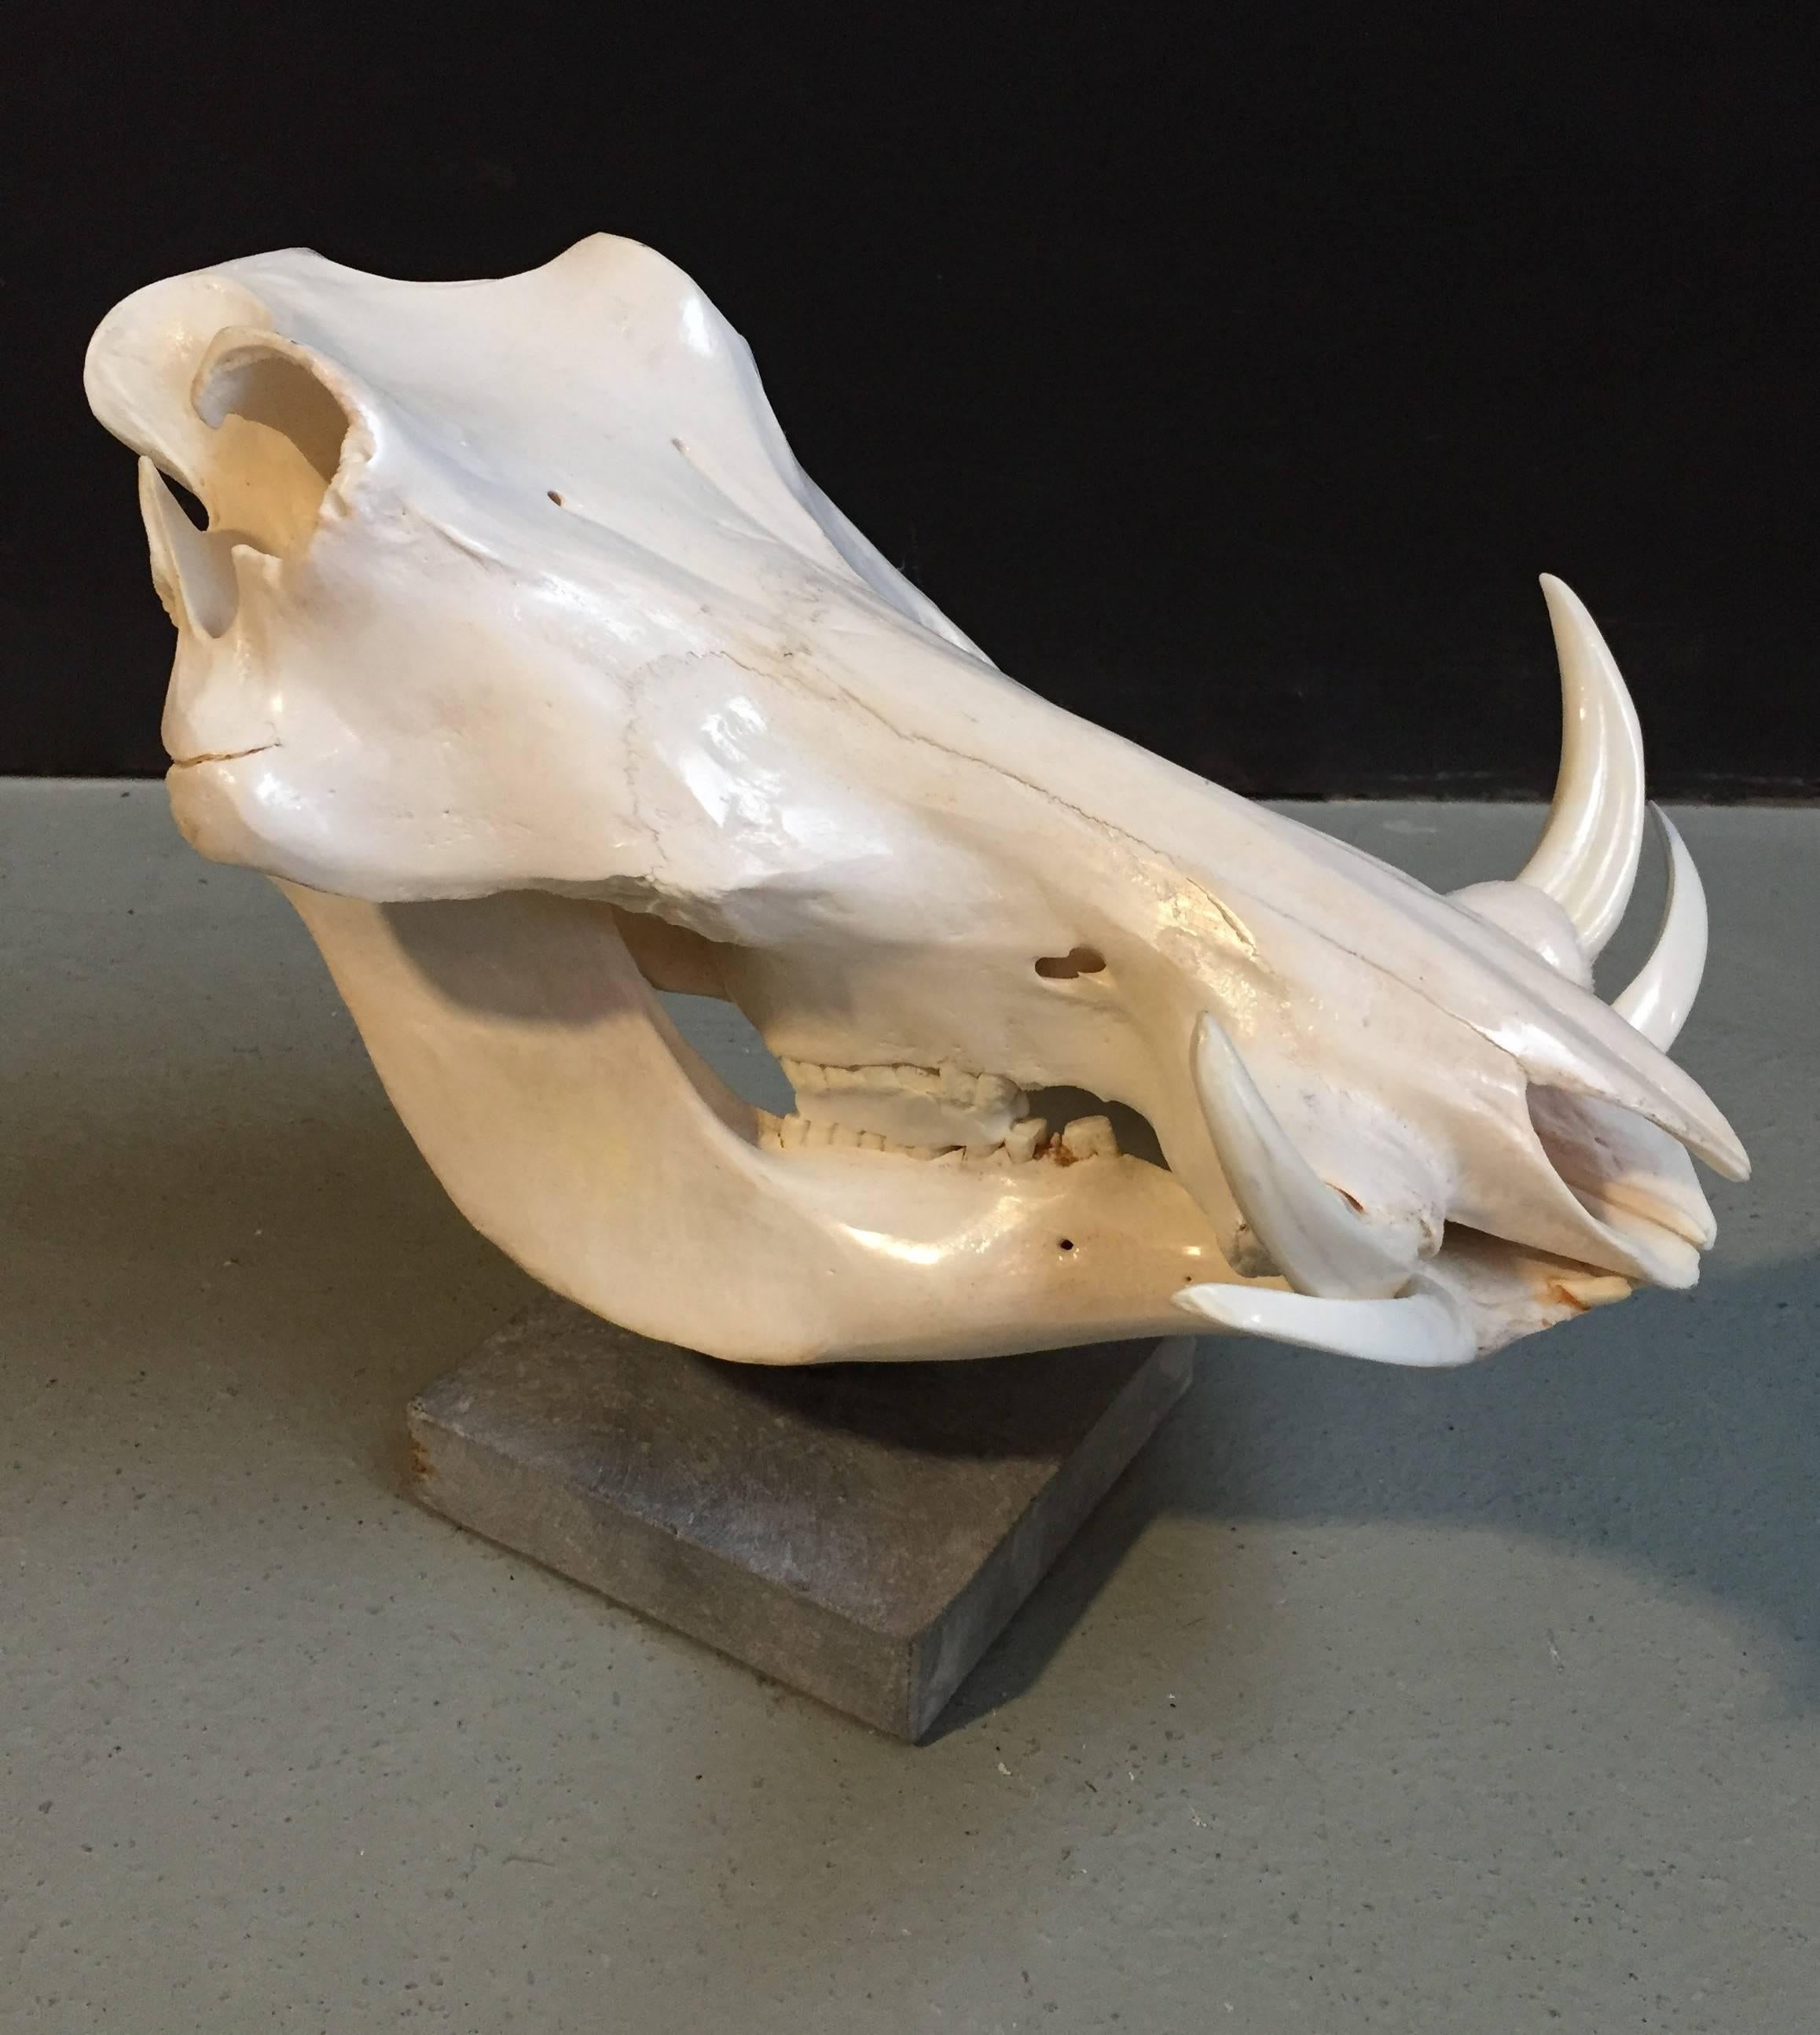 African warthog skull in excellent condition on a hardstone pedestal.
The skull is polished and has a light shine patine.